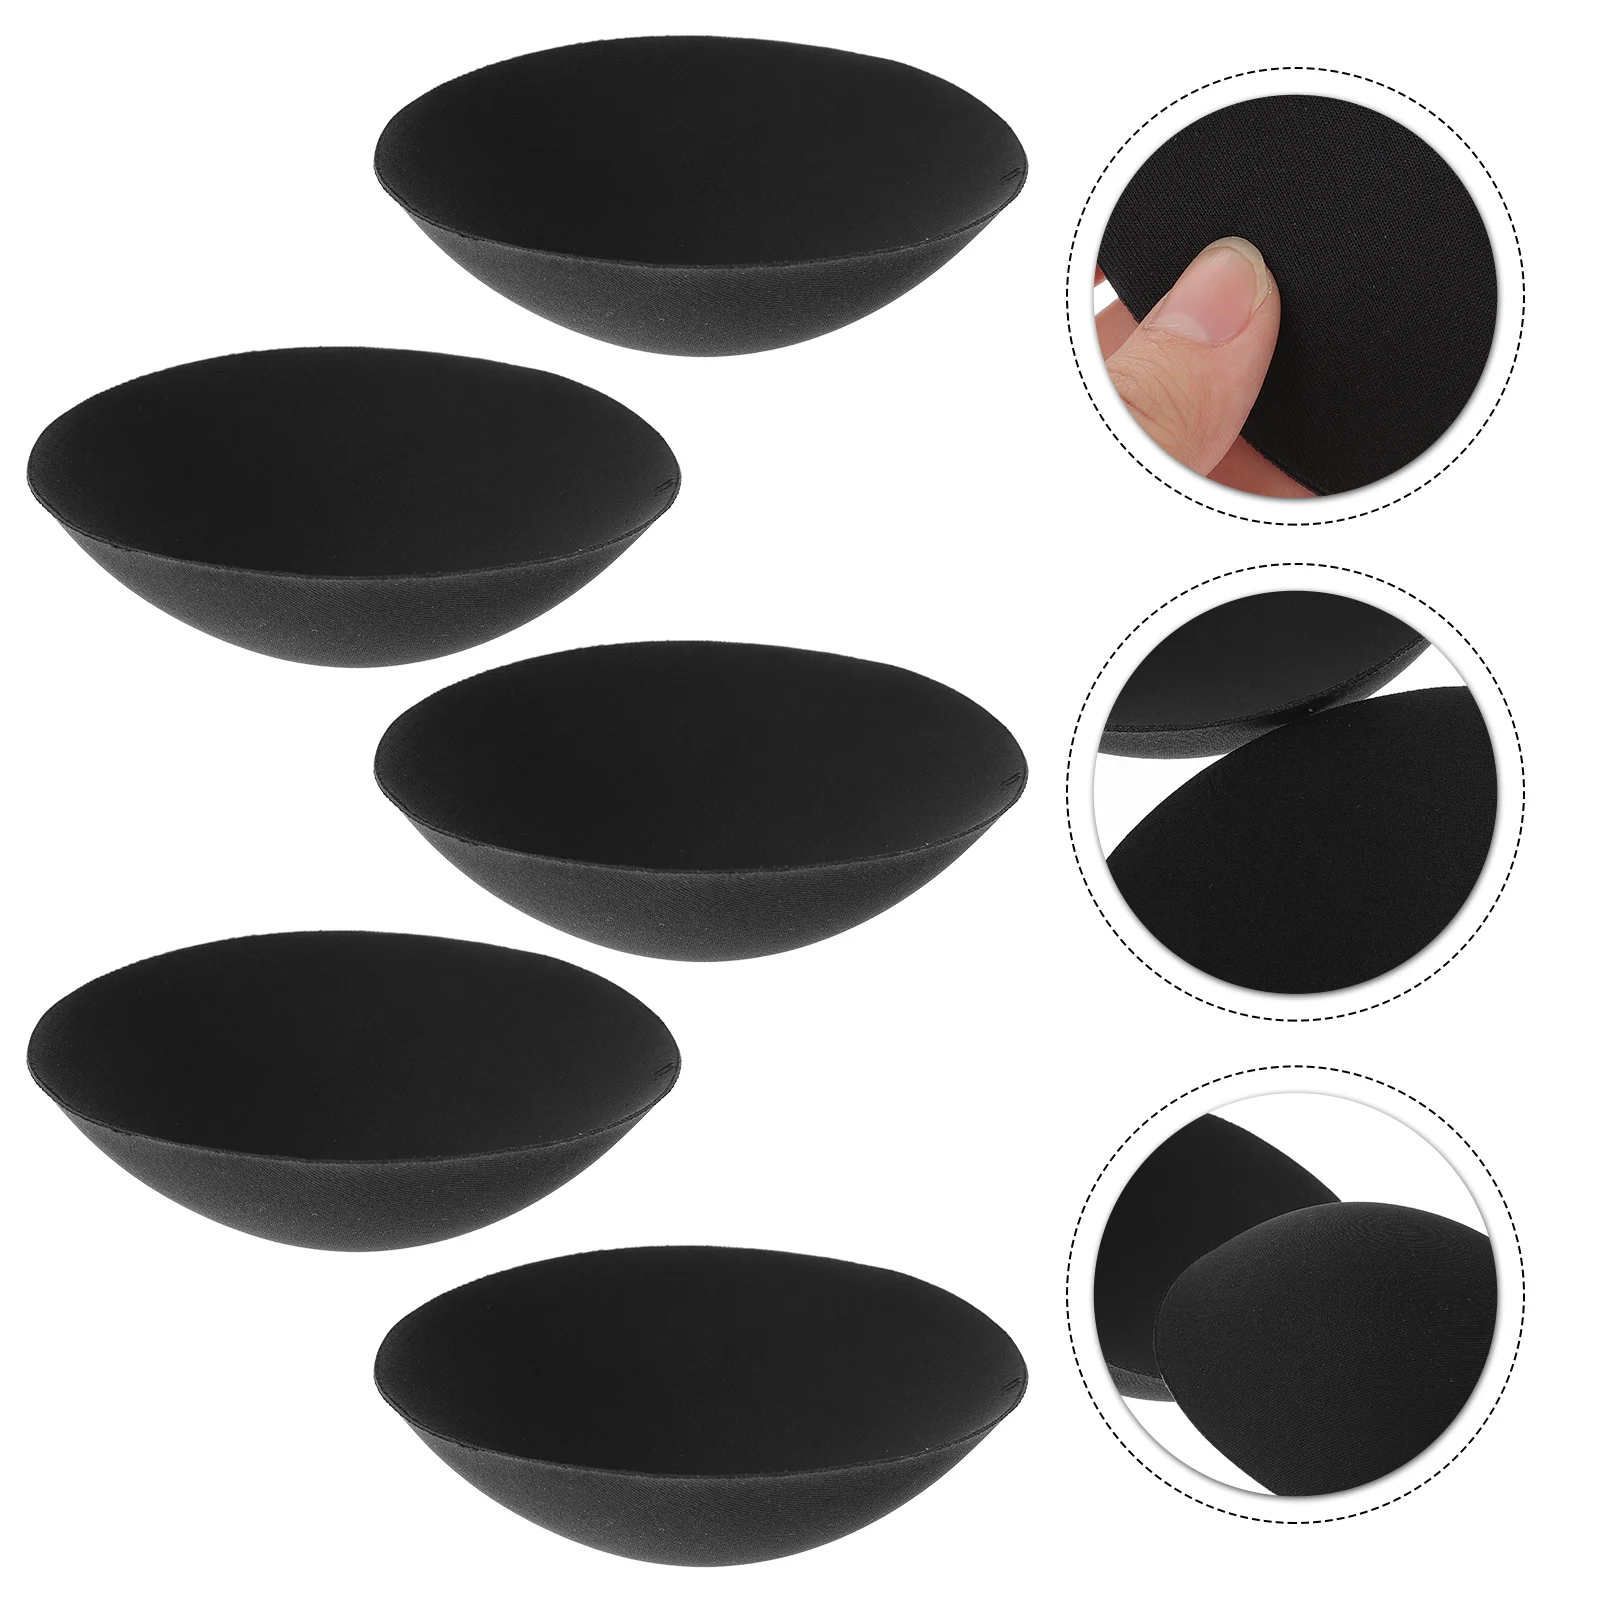 

5 Pairs Removable Pads Inserts Pads Round Sew In Cups For Swimsuits Dresses Sports Black Beach wedding